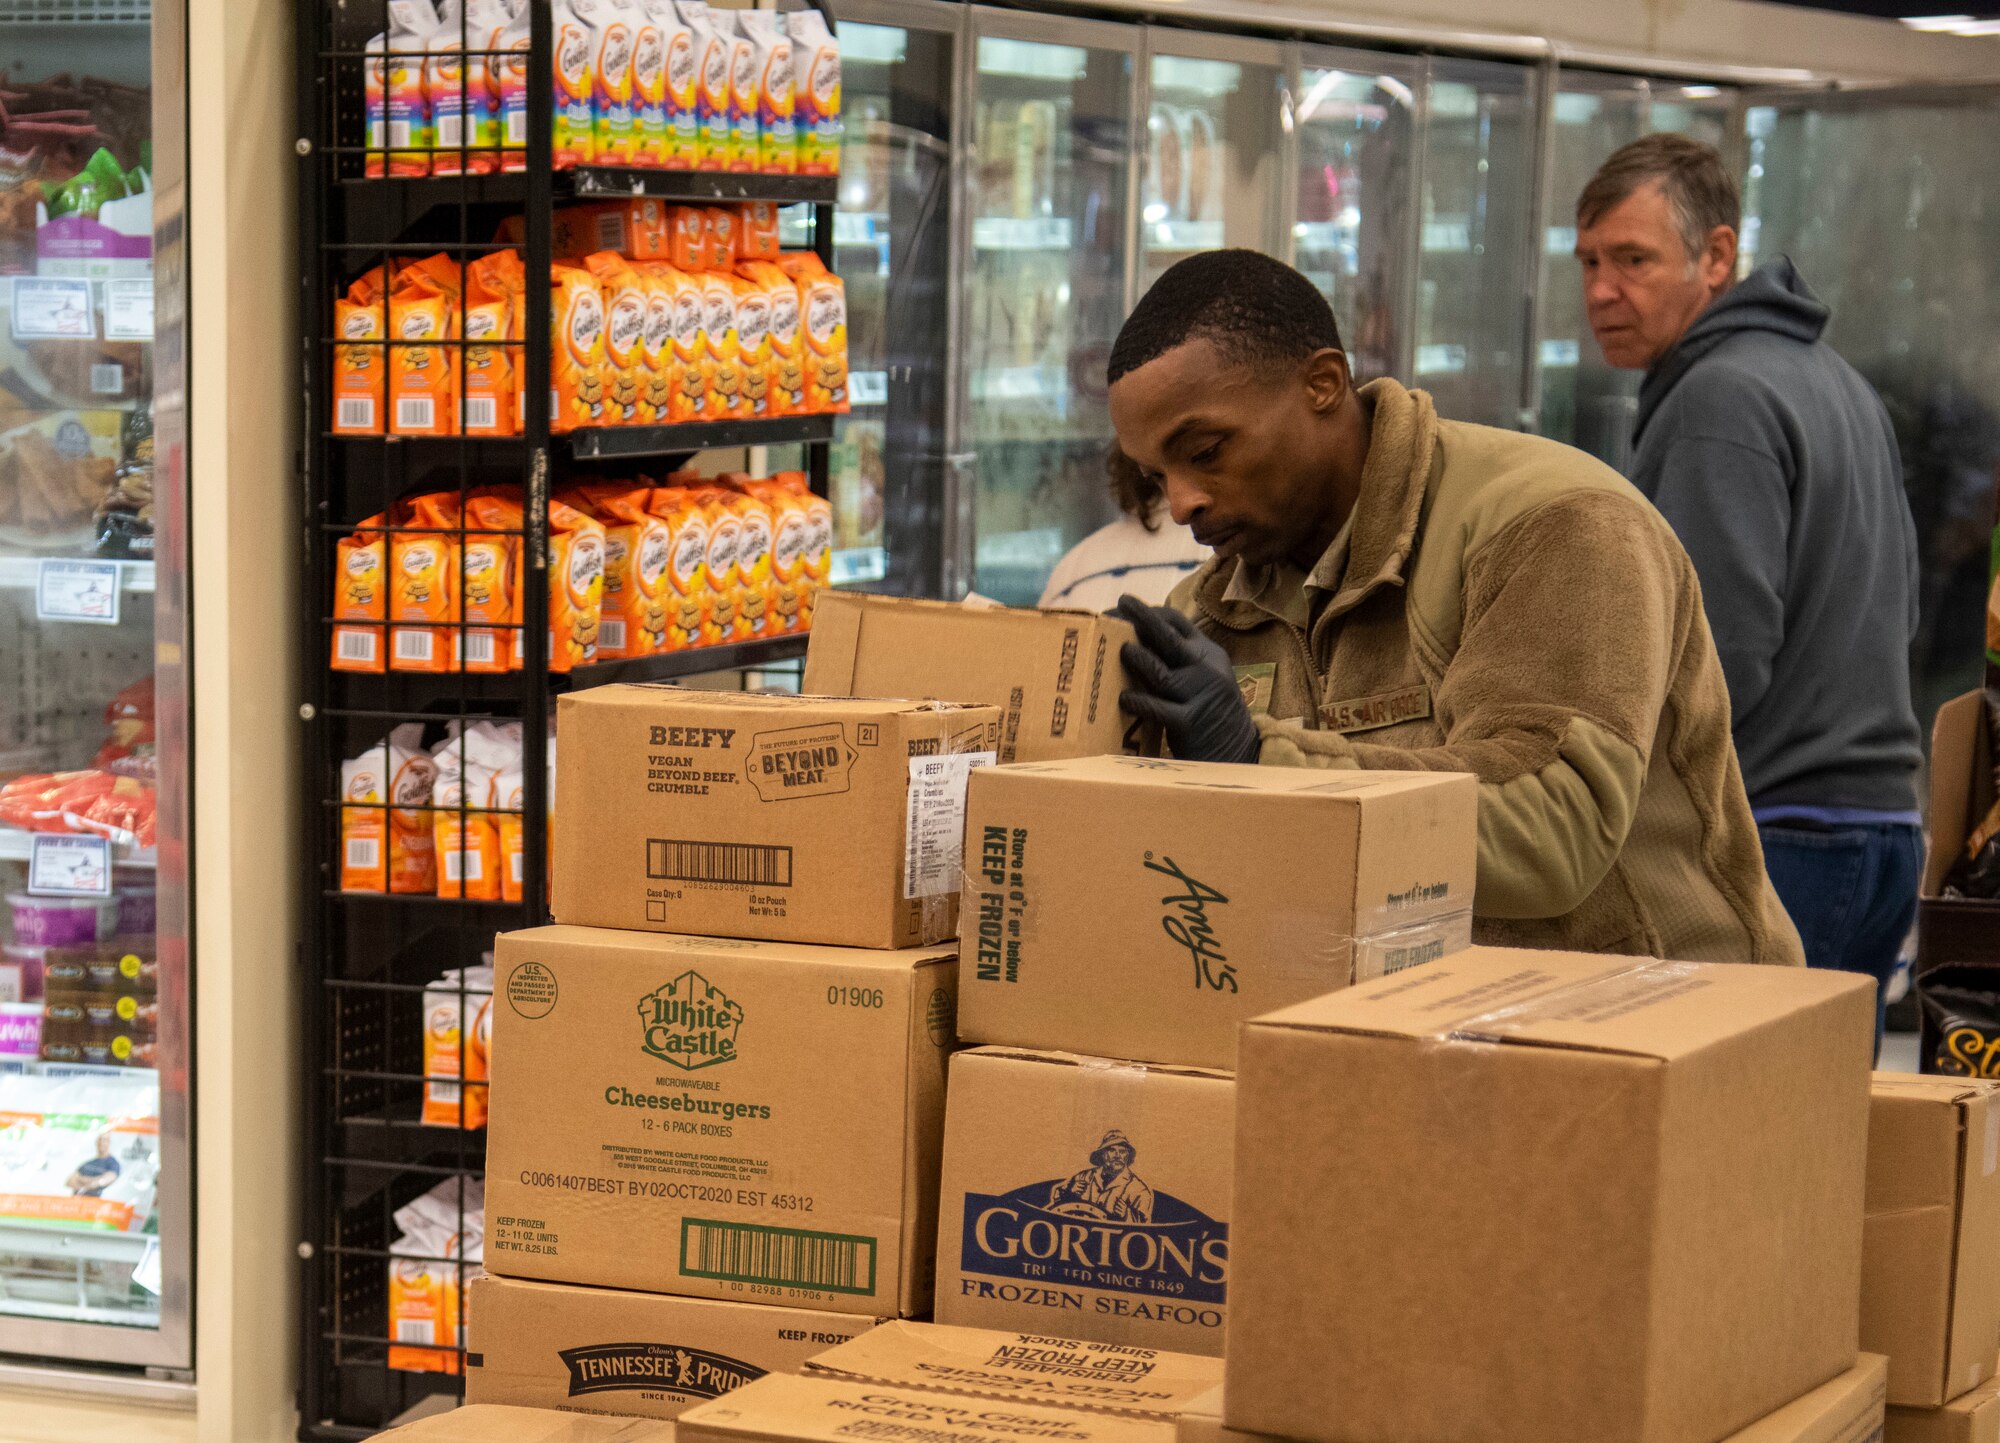 Master Sgt. Maurious McCall, 436th Security Forces Squadron first sergeant, picks up a box before stocking shelves March 25, 2020, at Dover Air Force Base, Del. The Chiefs Group and First Sergeants volunteered at the Commissary checking IDs, assisting with social distancing measures, and stocking shelves to help mitigate the spread of COVID-19, reduce confusion and ensure Airmen and their families still had access to essential items.(U.S. Air Force photo by Airman 1st Class Jonathan Harding)